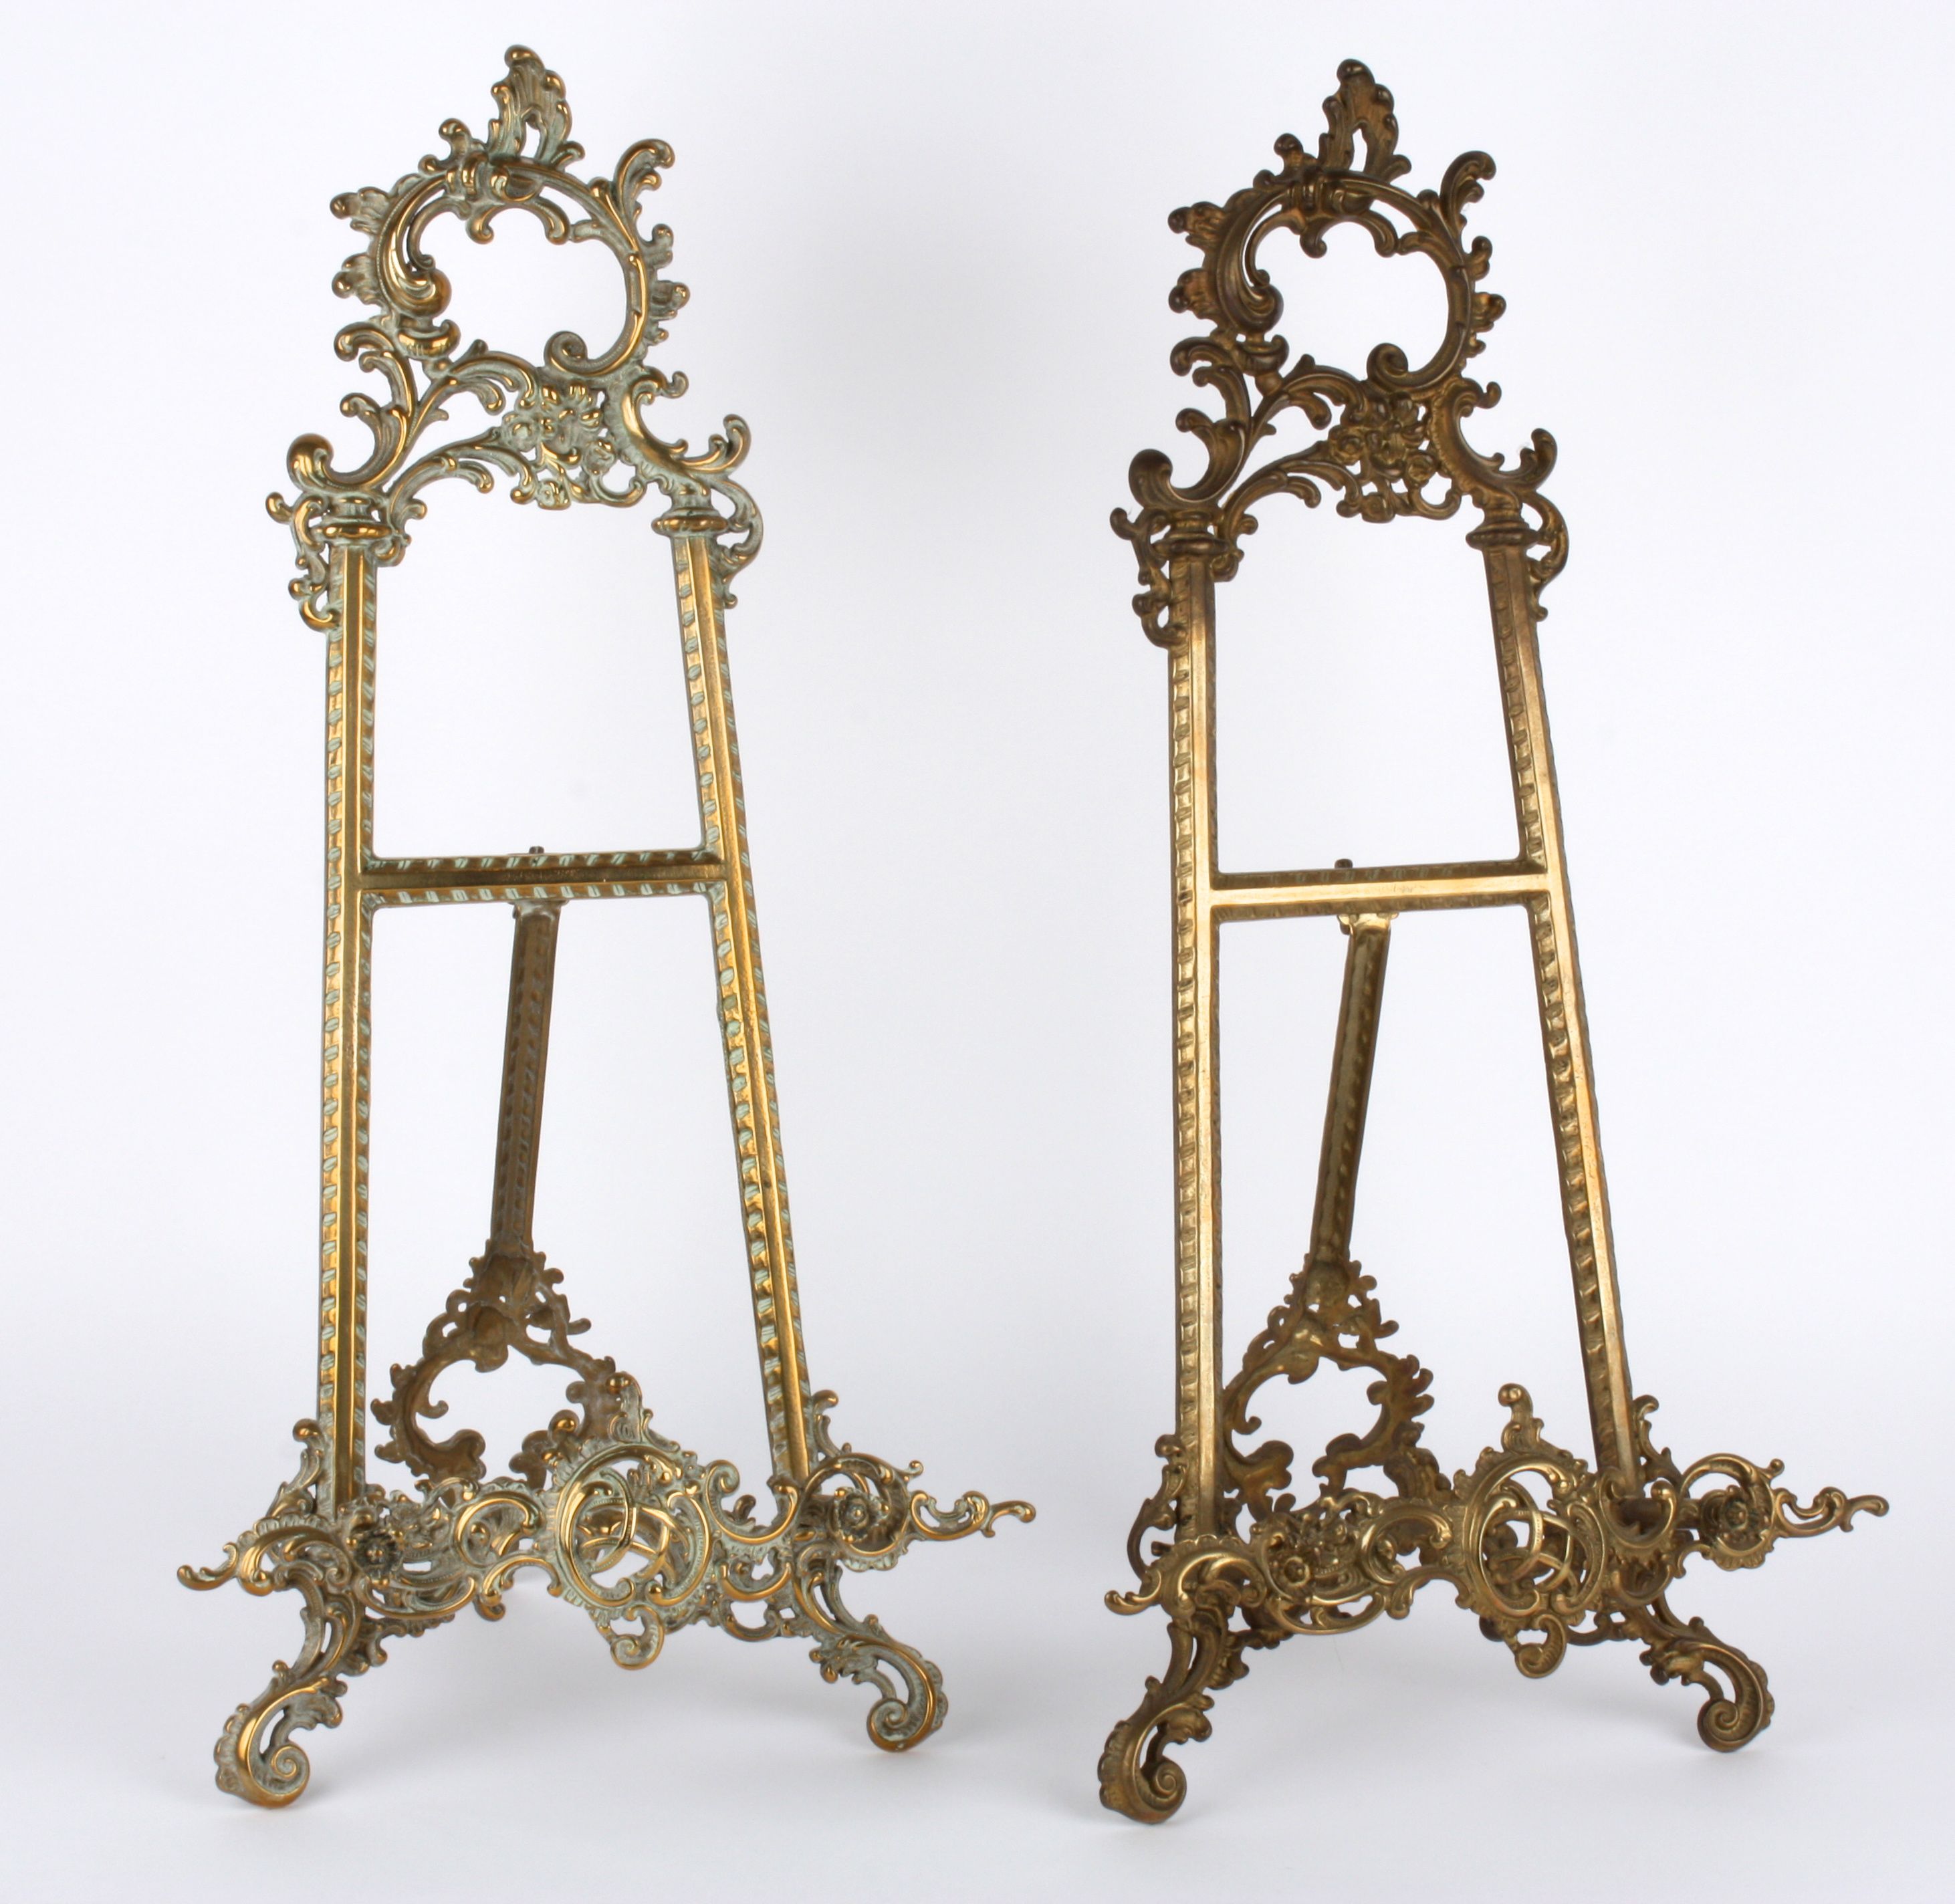 A pair of brass decorative easels, 20th century of typical easel form with pierced and scrolled